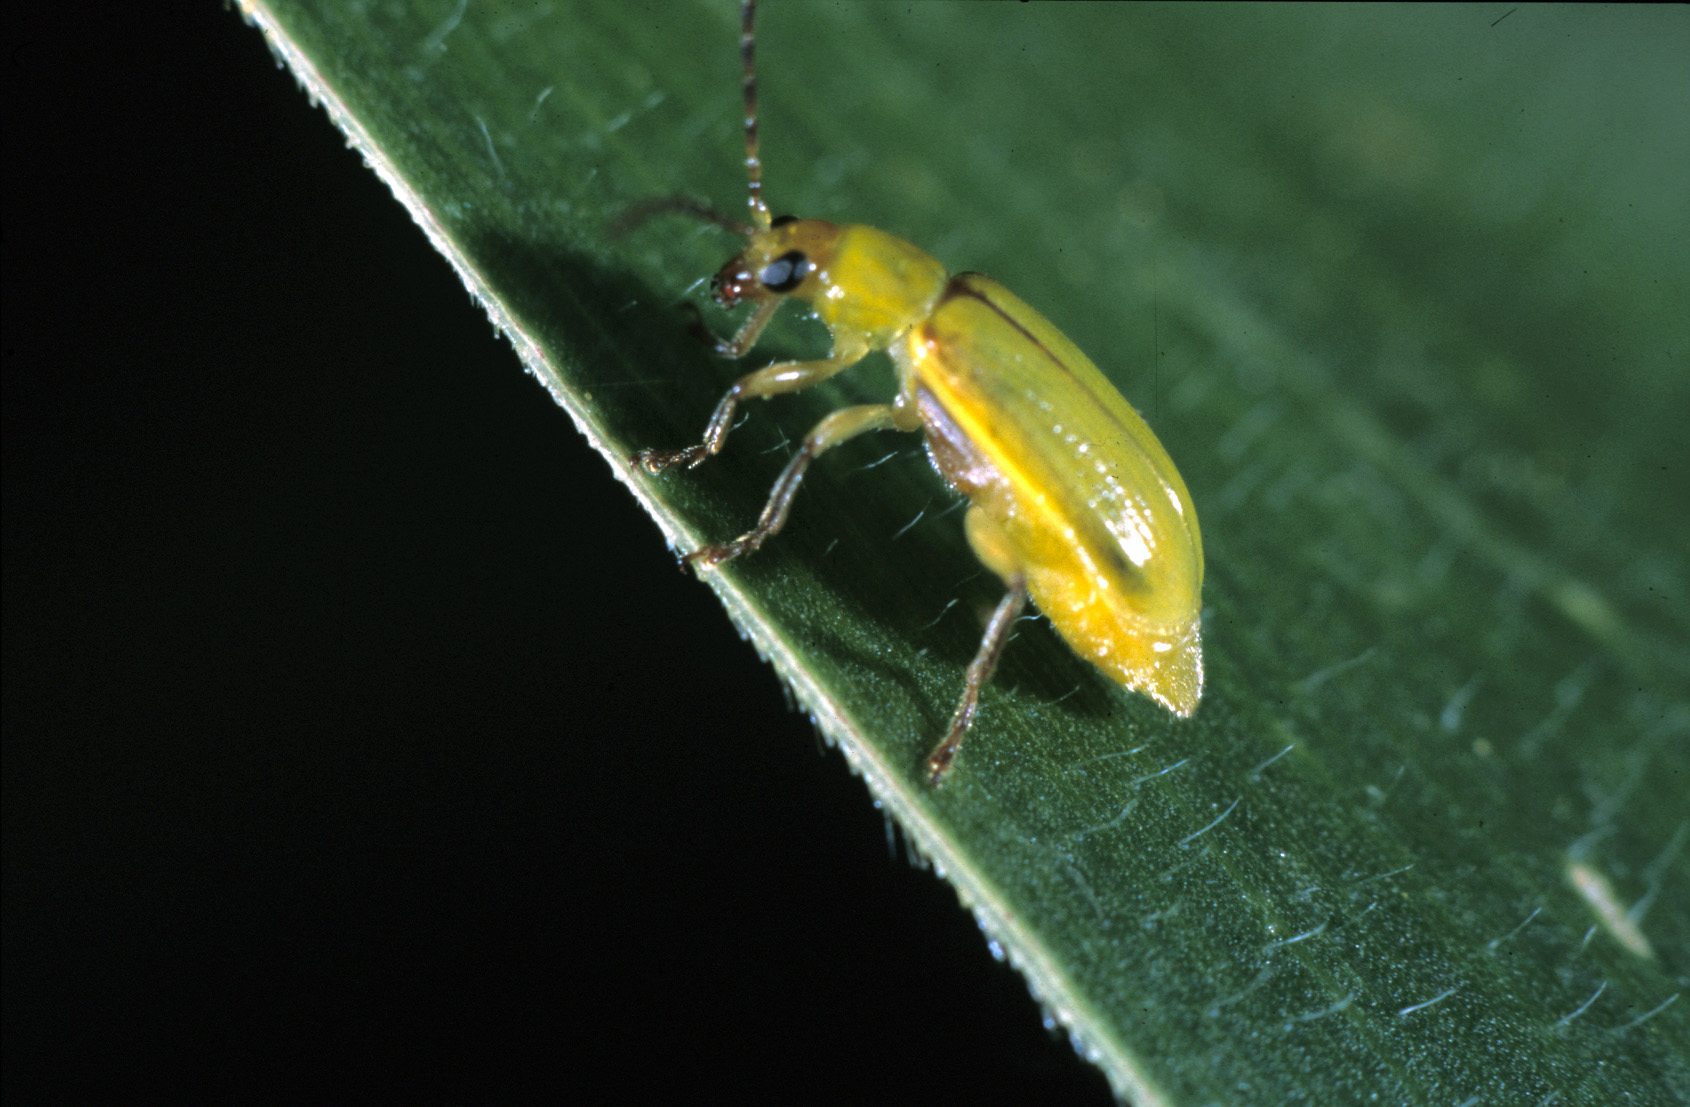 Northern corn rootworm adult on a corn leaf